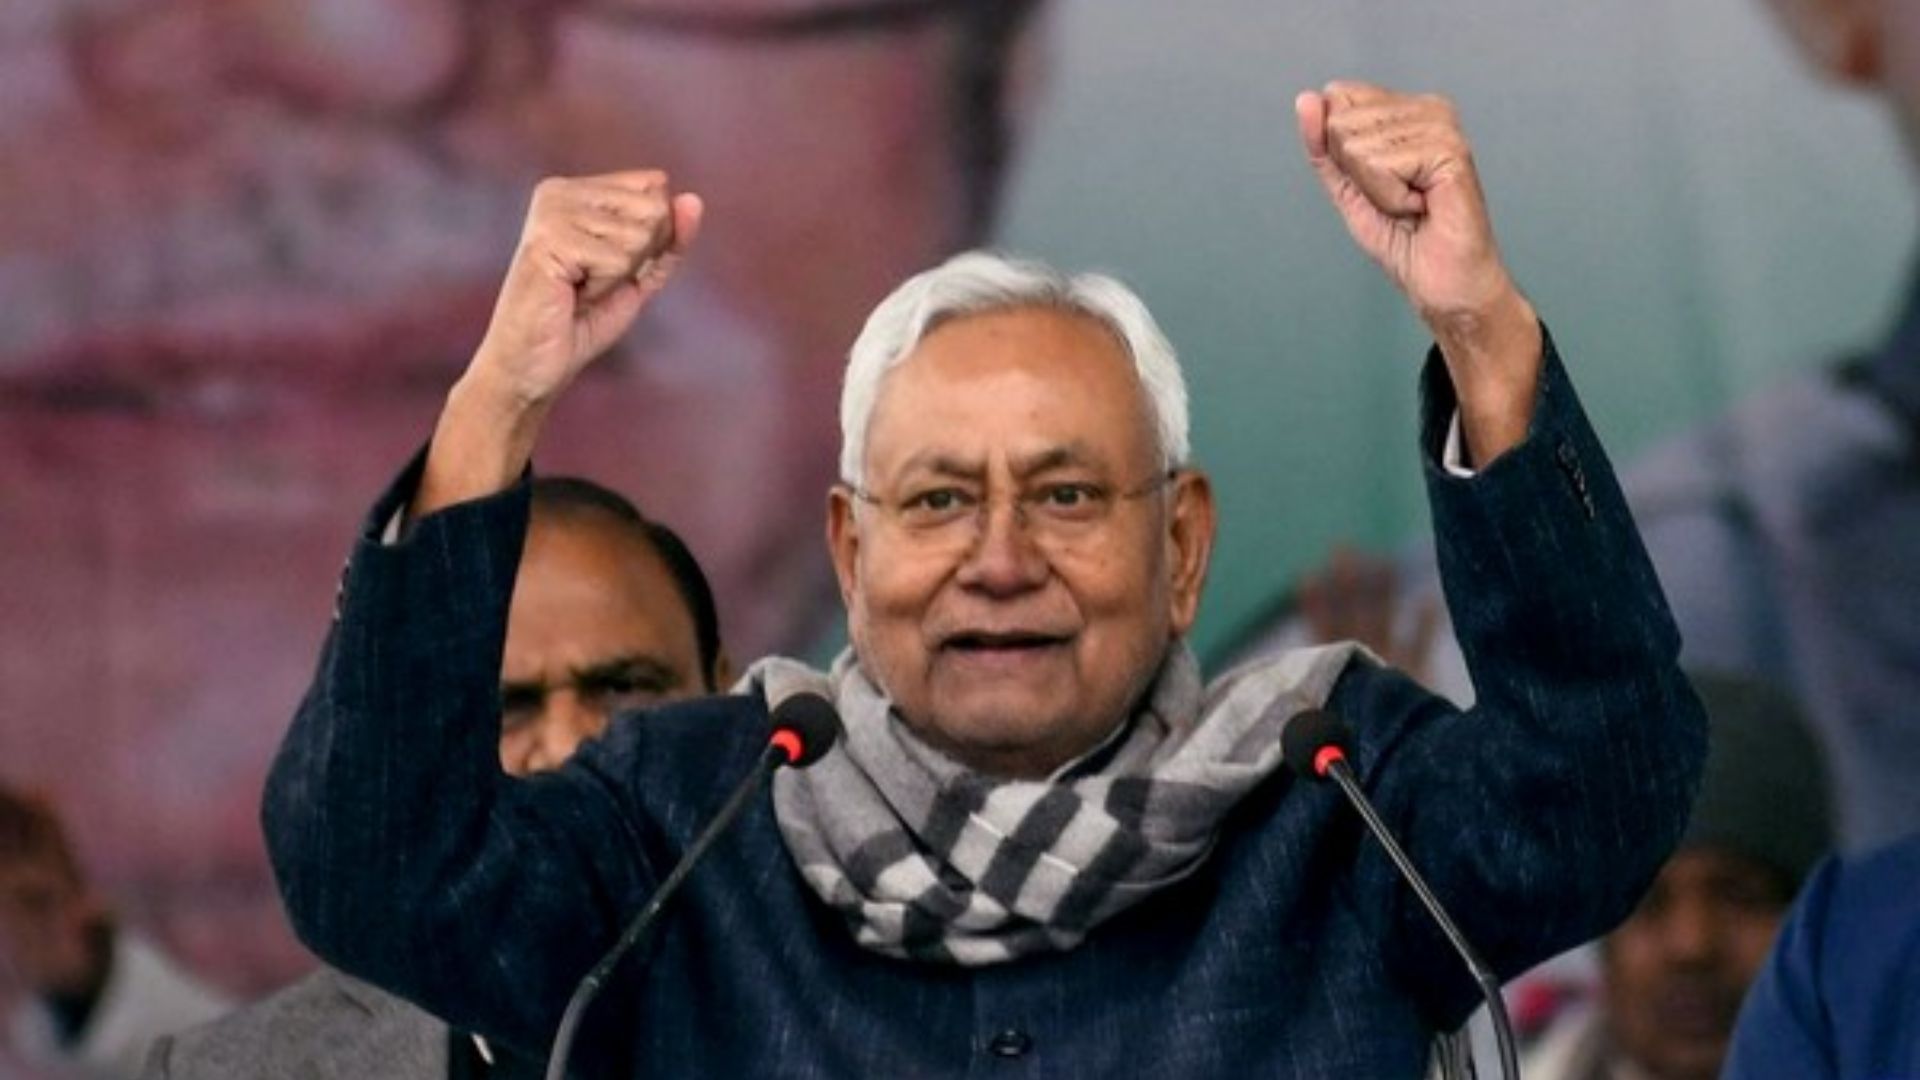 “Proposal passed to form government with JDU in Bihar”: BJP after Nitish Kumar’s resignation